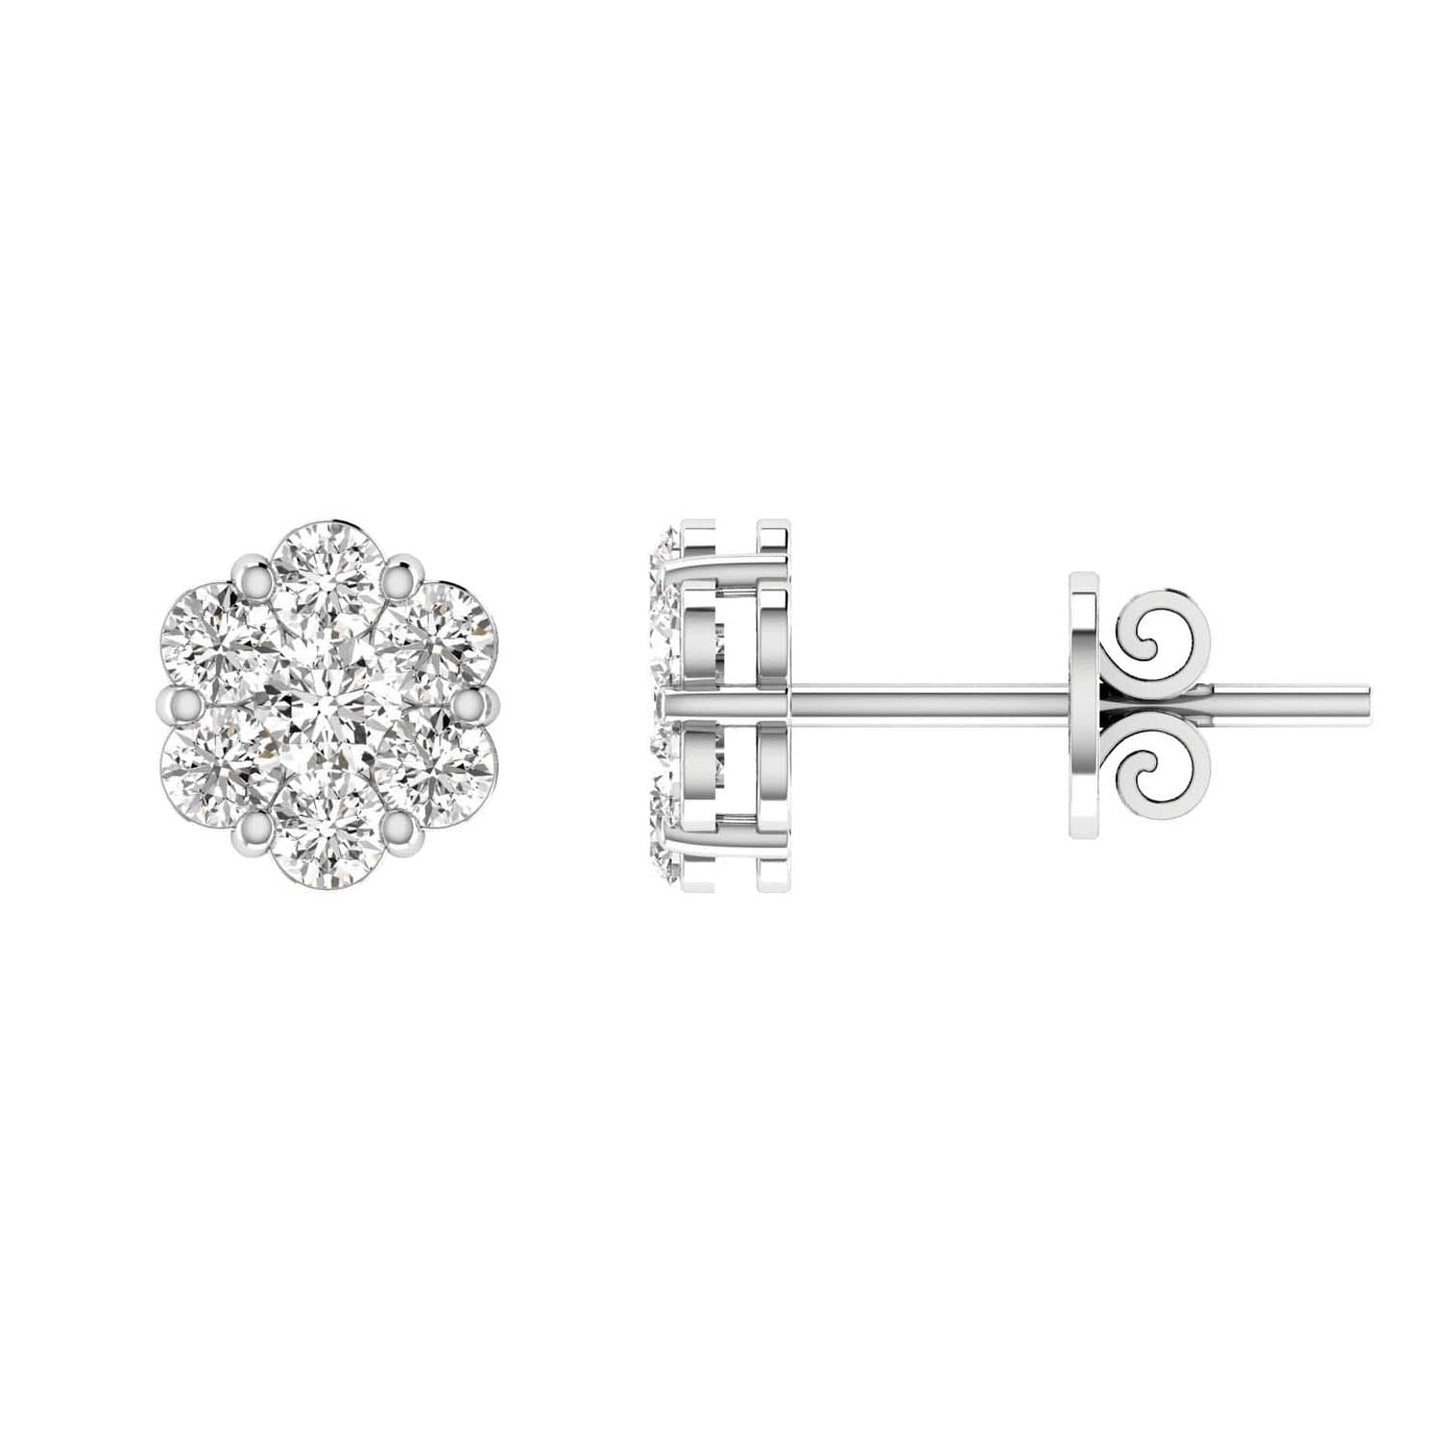 Cluster Stud Diamond Earrings with 0.33ct Diamonds in 9K White Gold